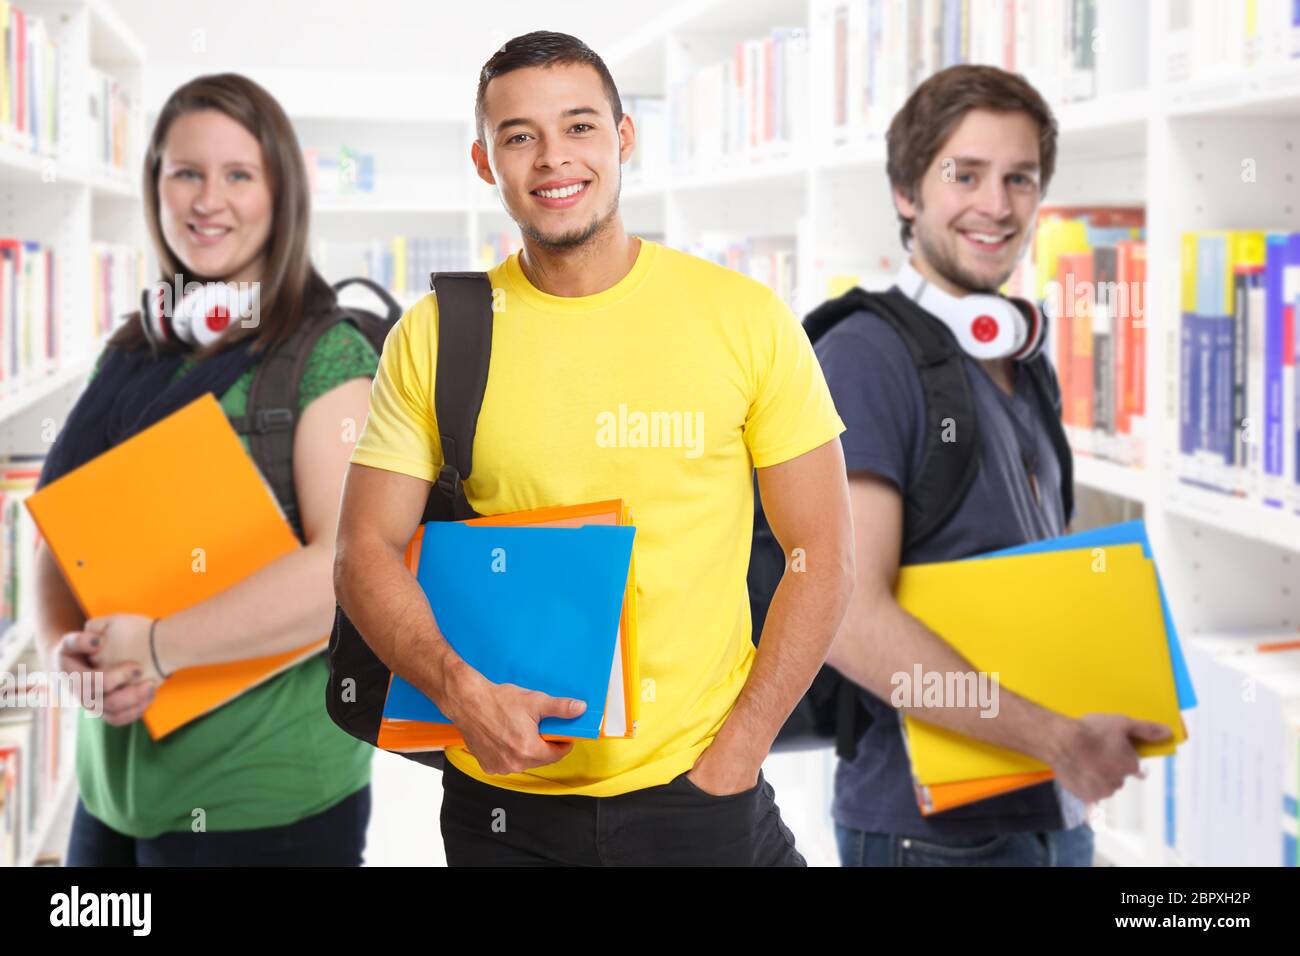 College students student young people studies library education smiling happy learning Stock Photo